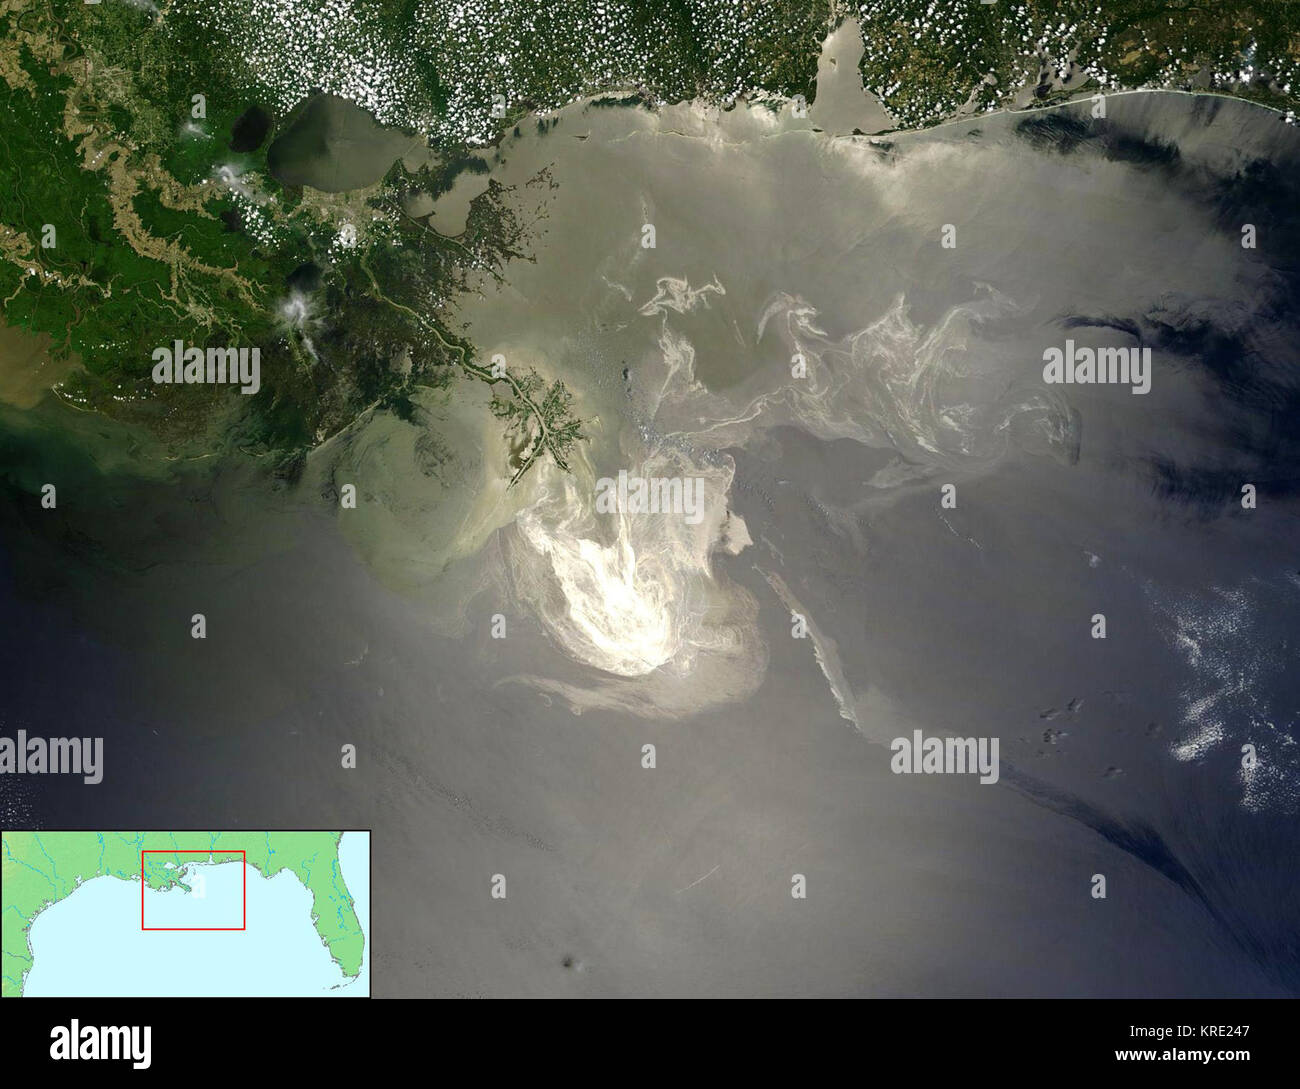 Deepwater Horizon oil spill - May 24, 2010 - with locator Stock Photo